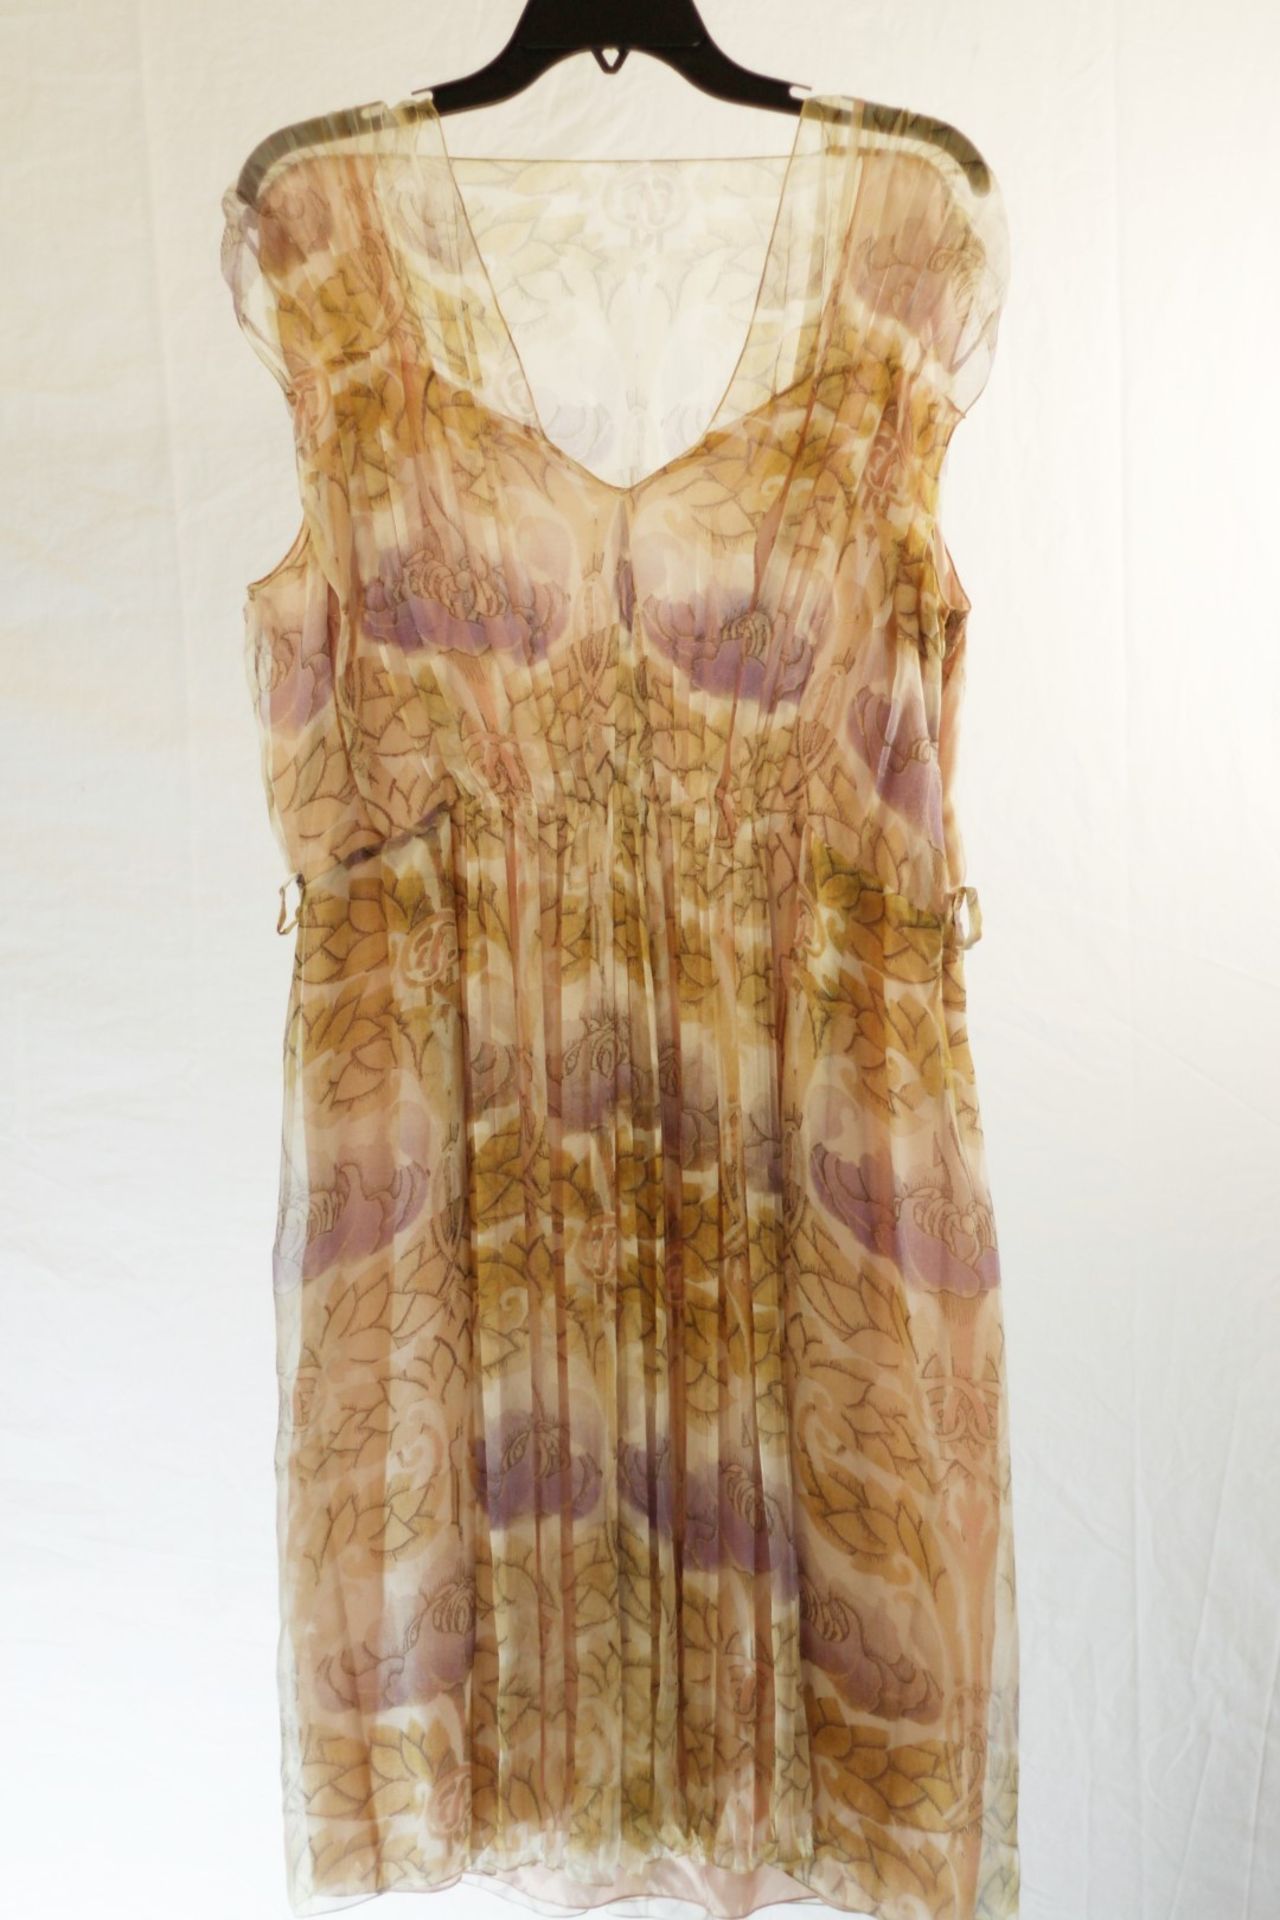 1 x Alberta Ferretti Dusted Rose Dress - Size: 16 - Material: 100% Silk - From a High End Clothing - Image 3 of 3